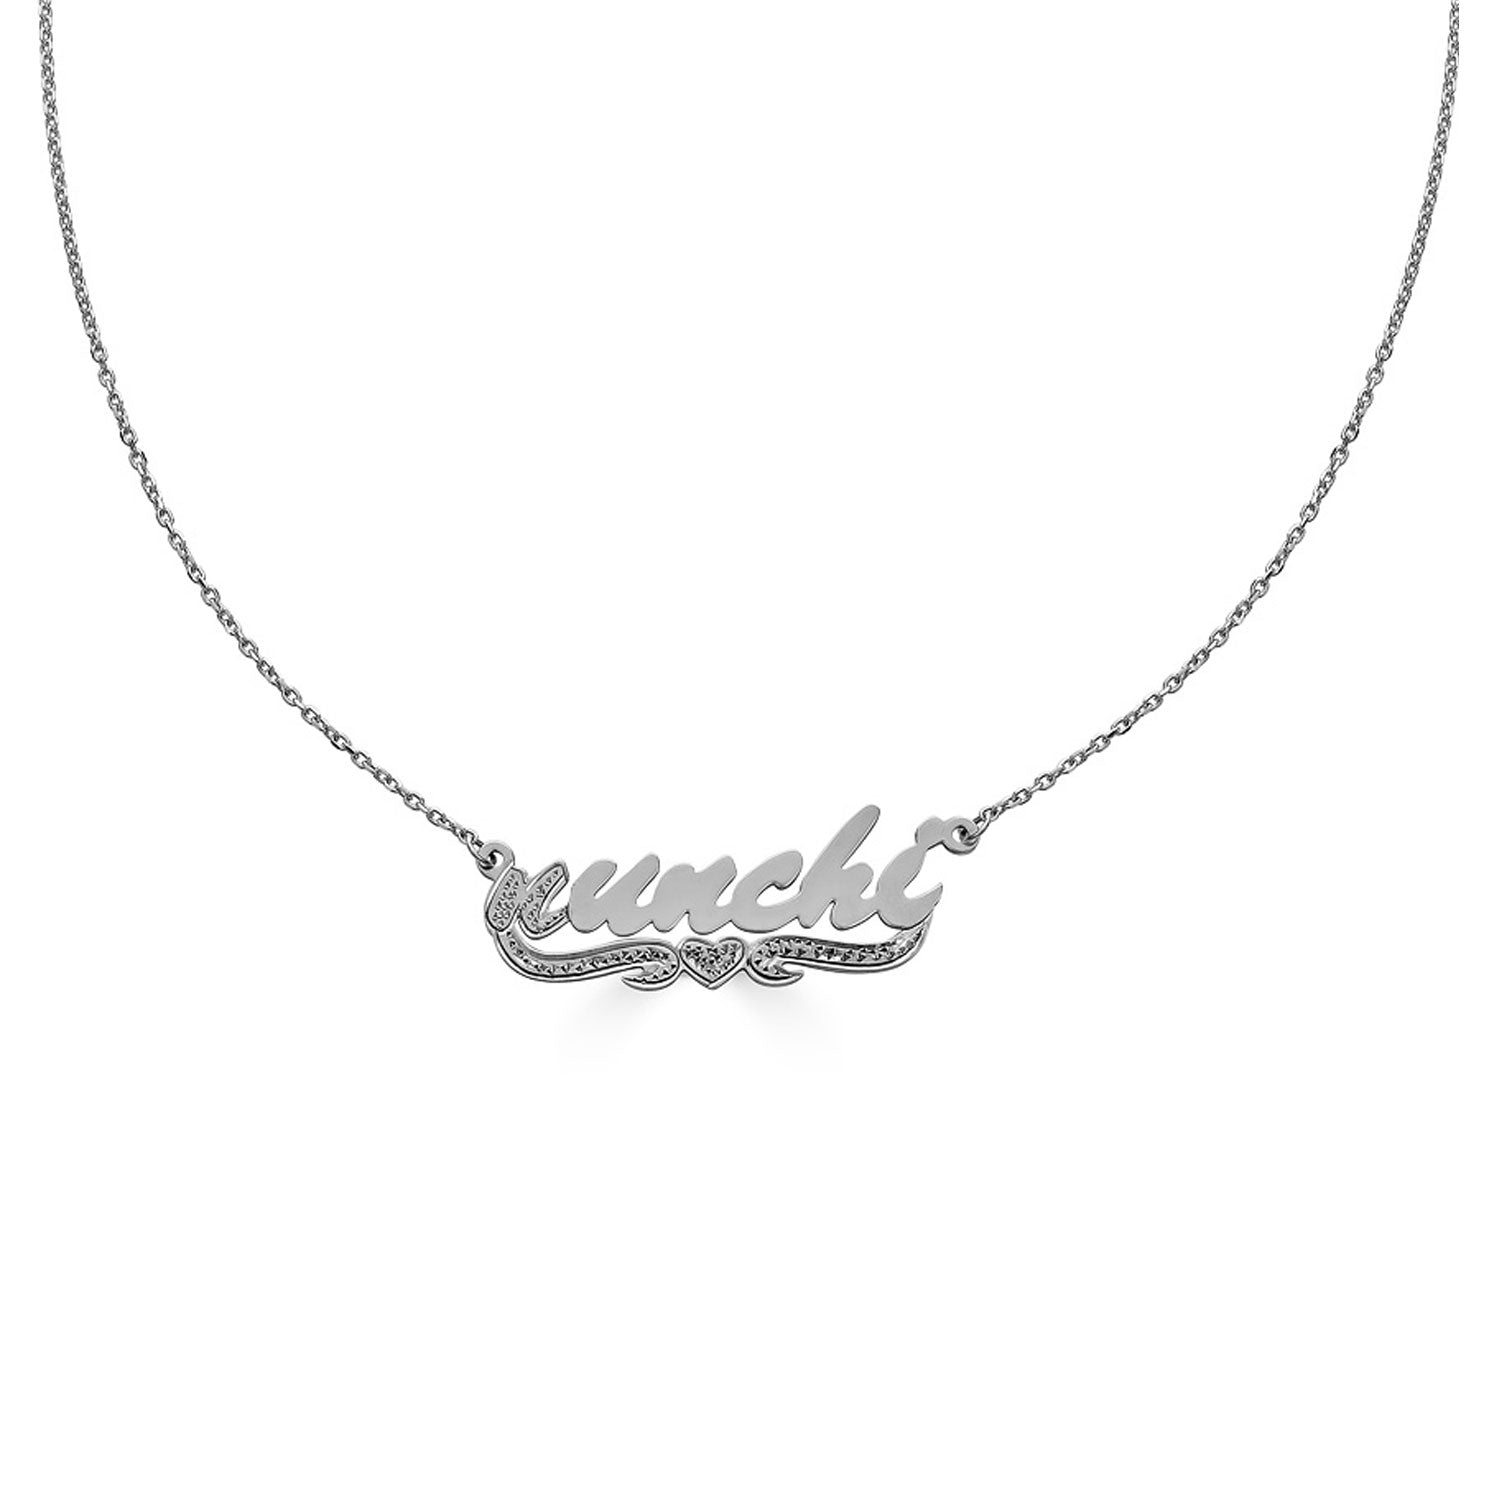 Buy 925 Sterling Silver Big Name Necklace Customized Nameplate Pendant  Cursive Scarlett Online in India - Etsy